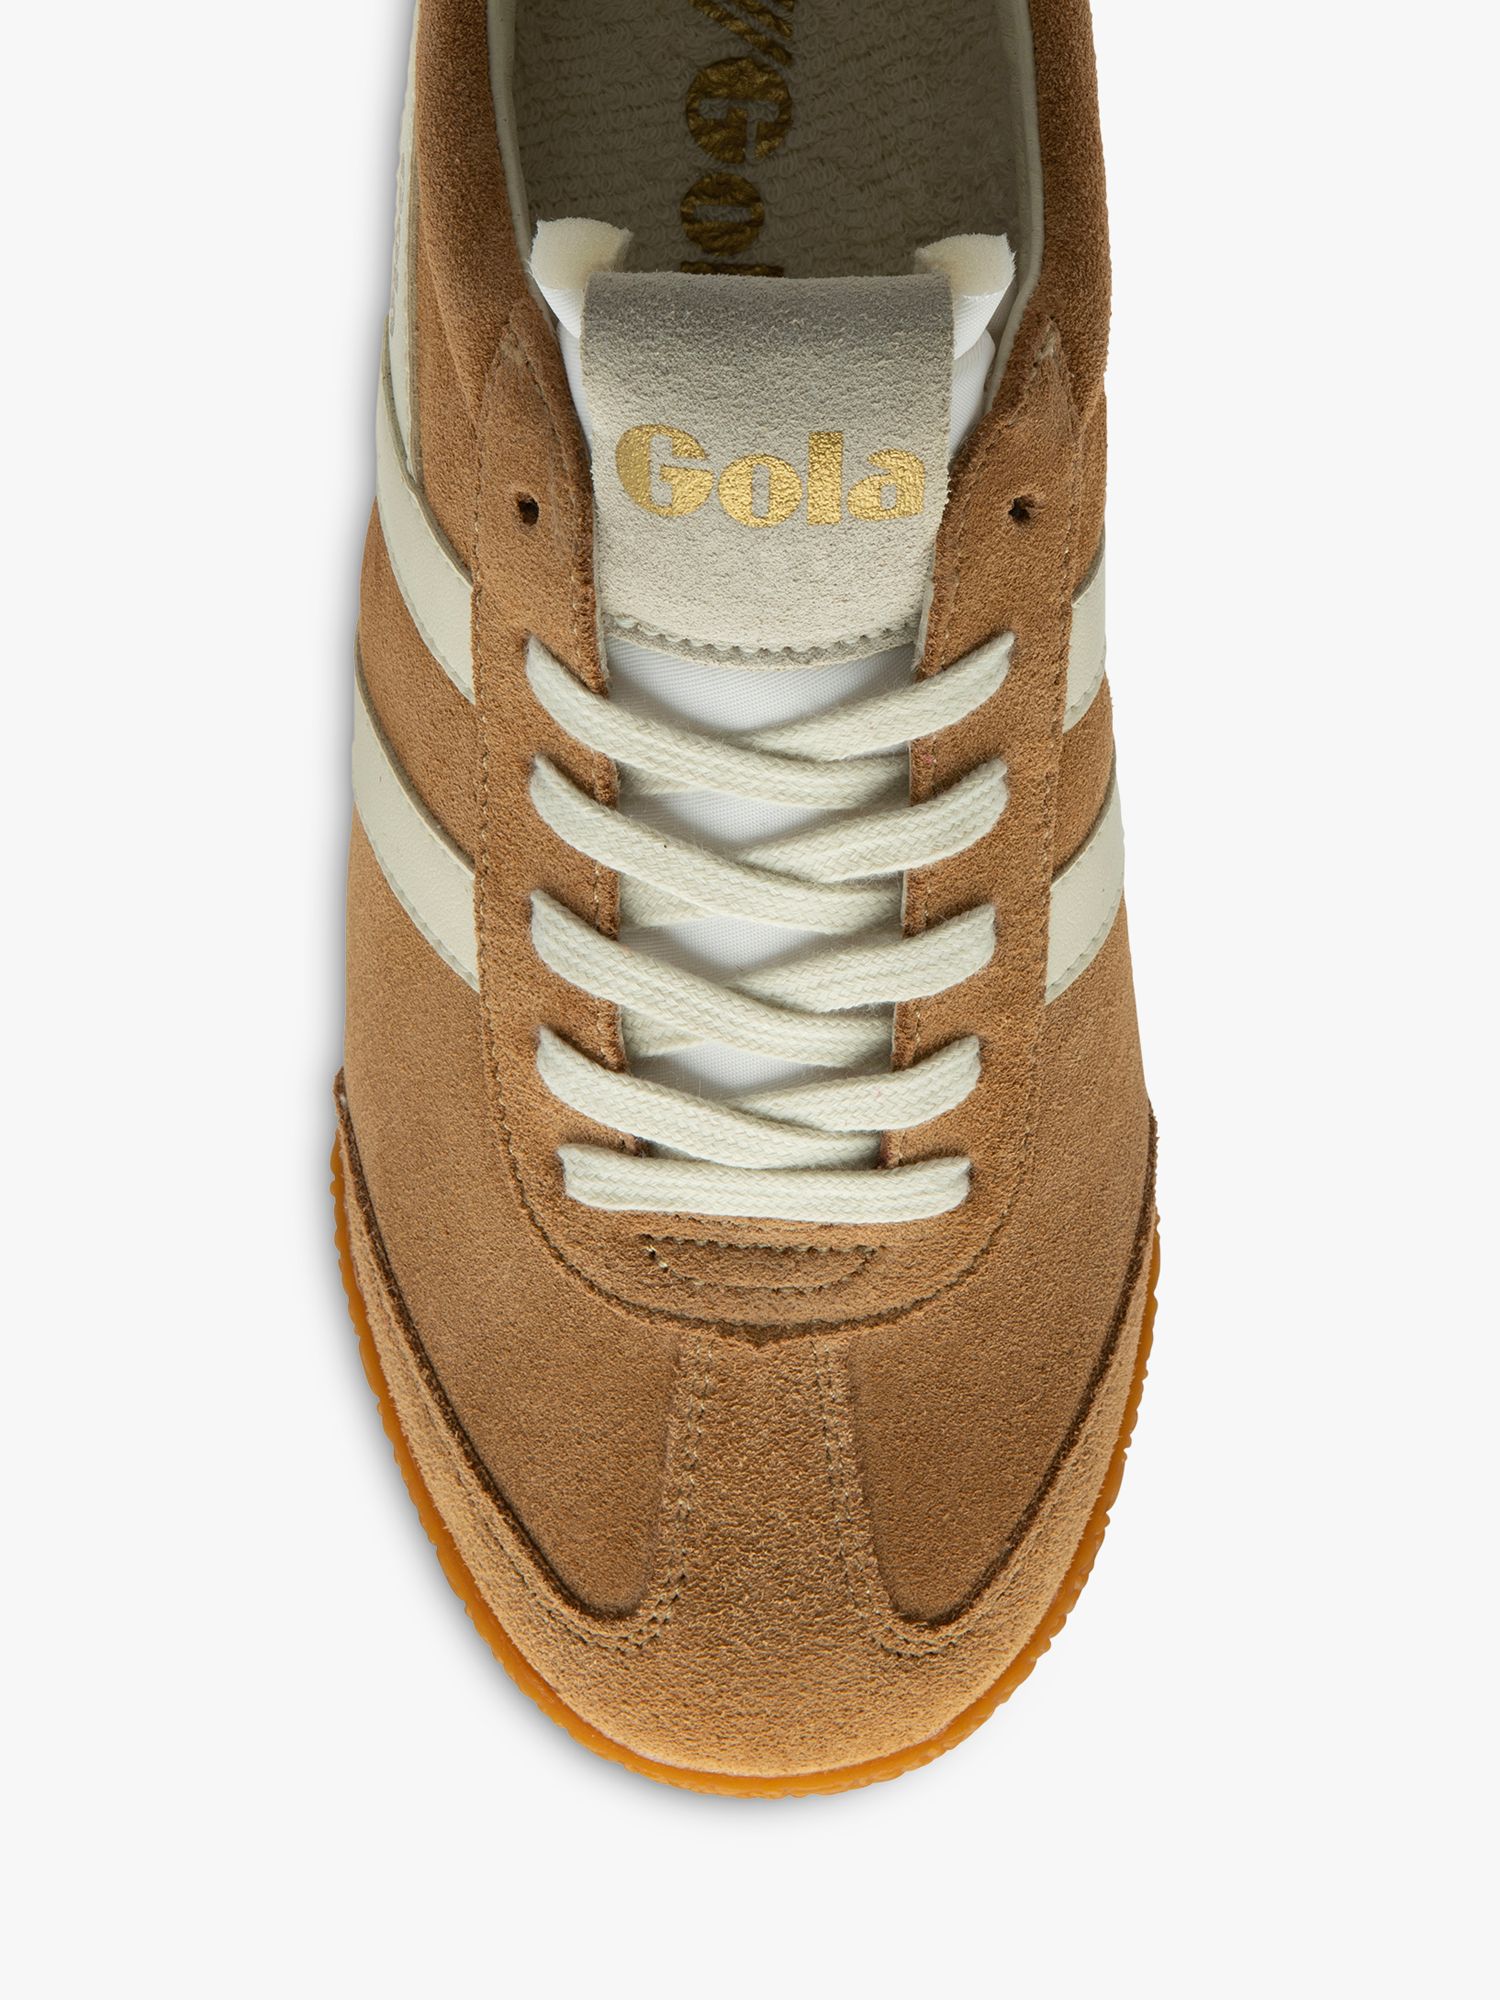 Buy Gola Classics Elan Suede Lace Up Trainers Online at johnlewis.com